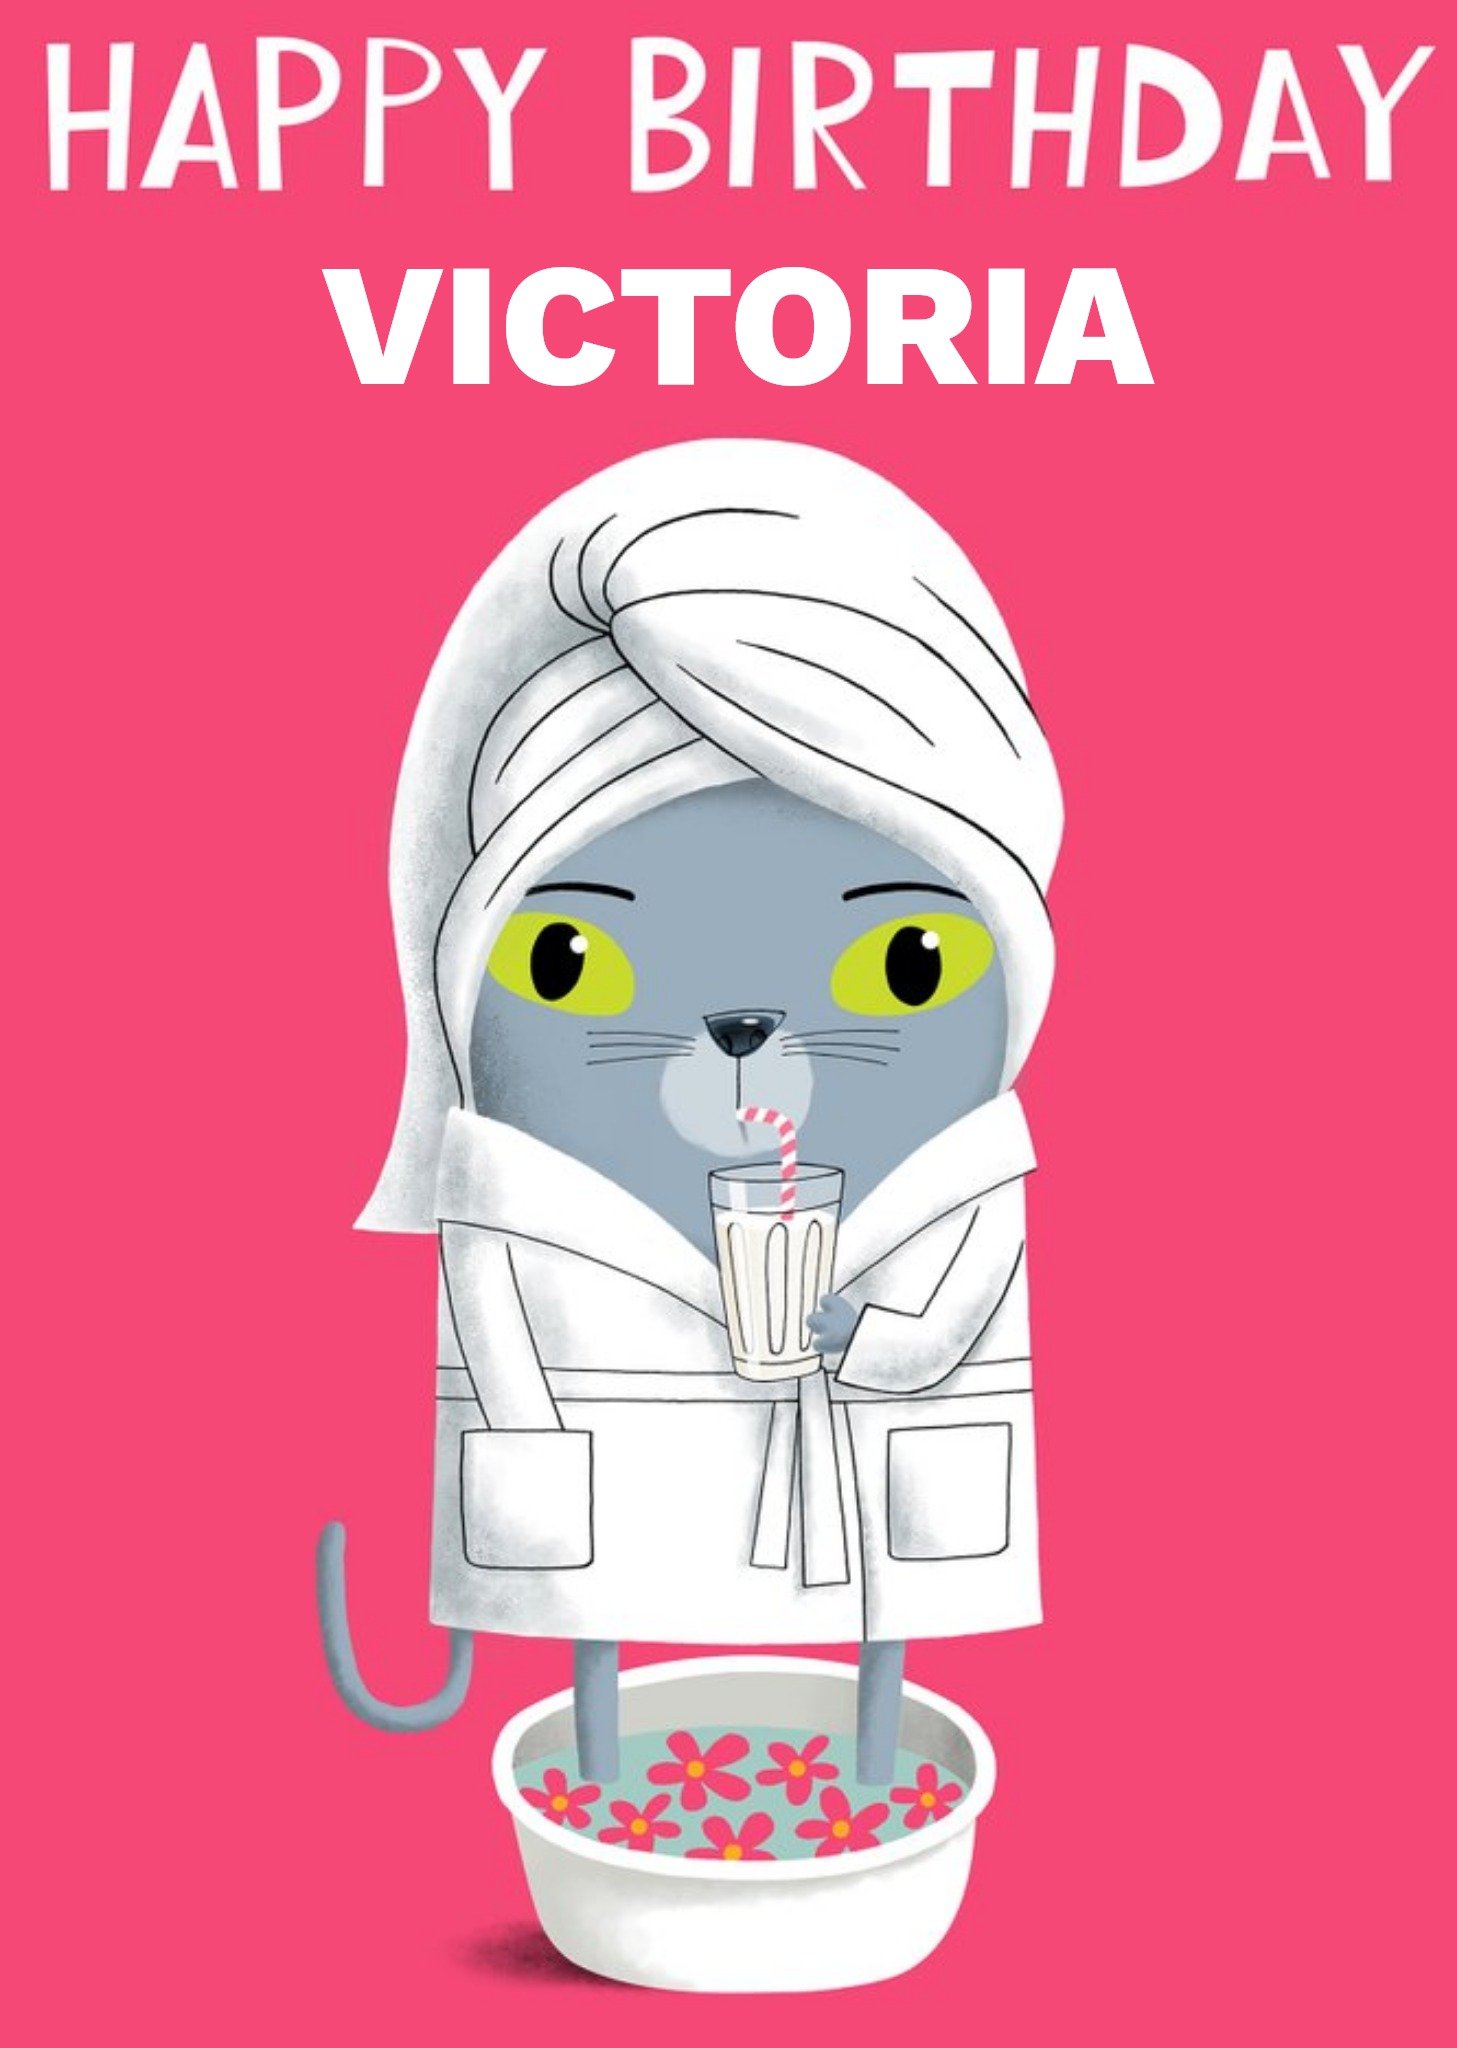 Moonpig Illustration Of A Cat In A Bathrobe Drinking Milk Relaxing With Its Feet In A Foot Spa Birth